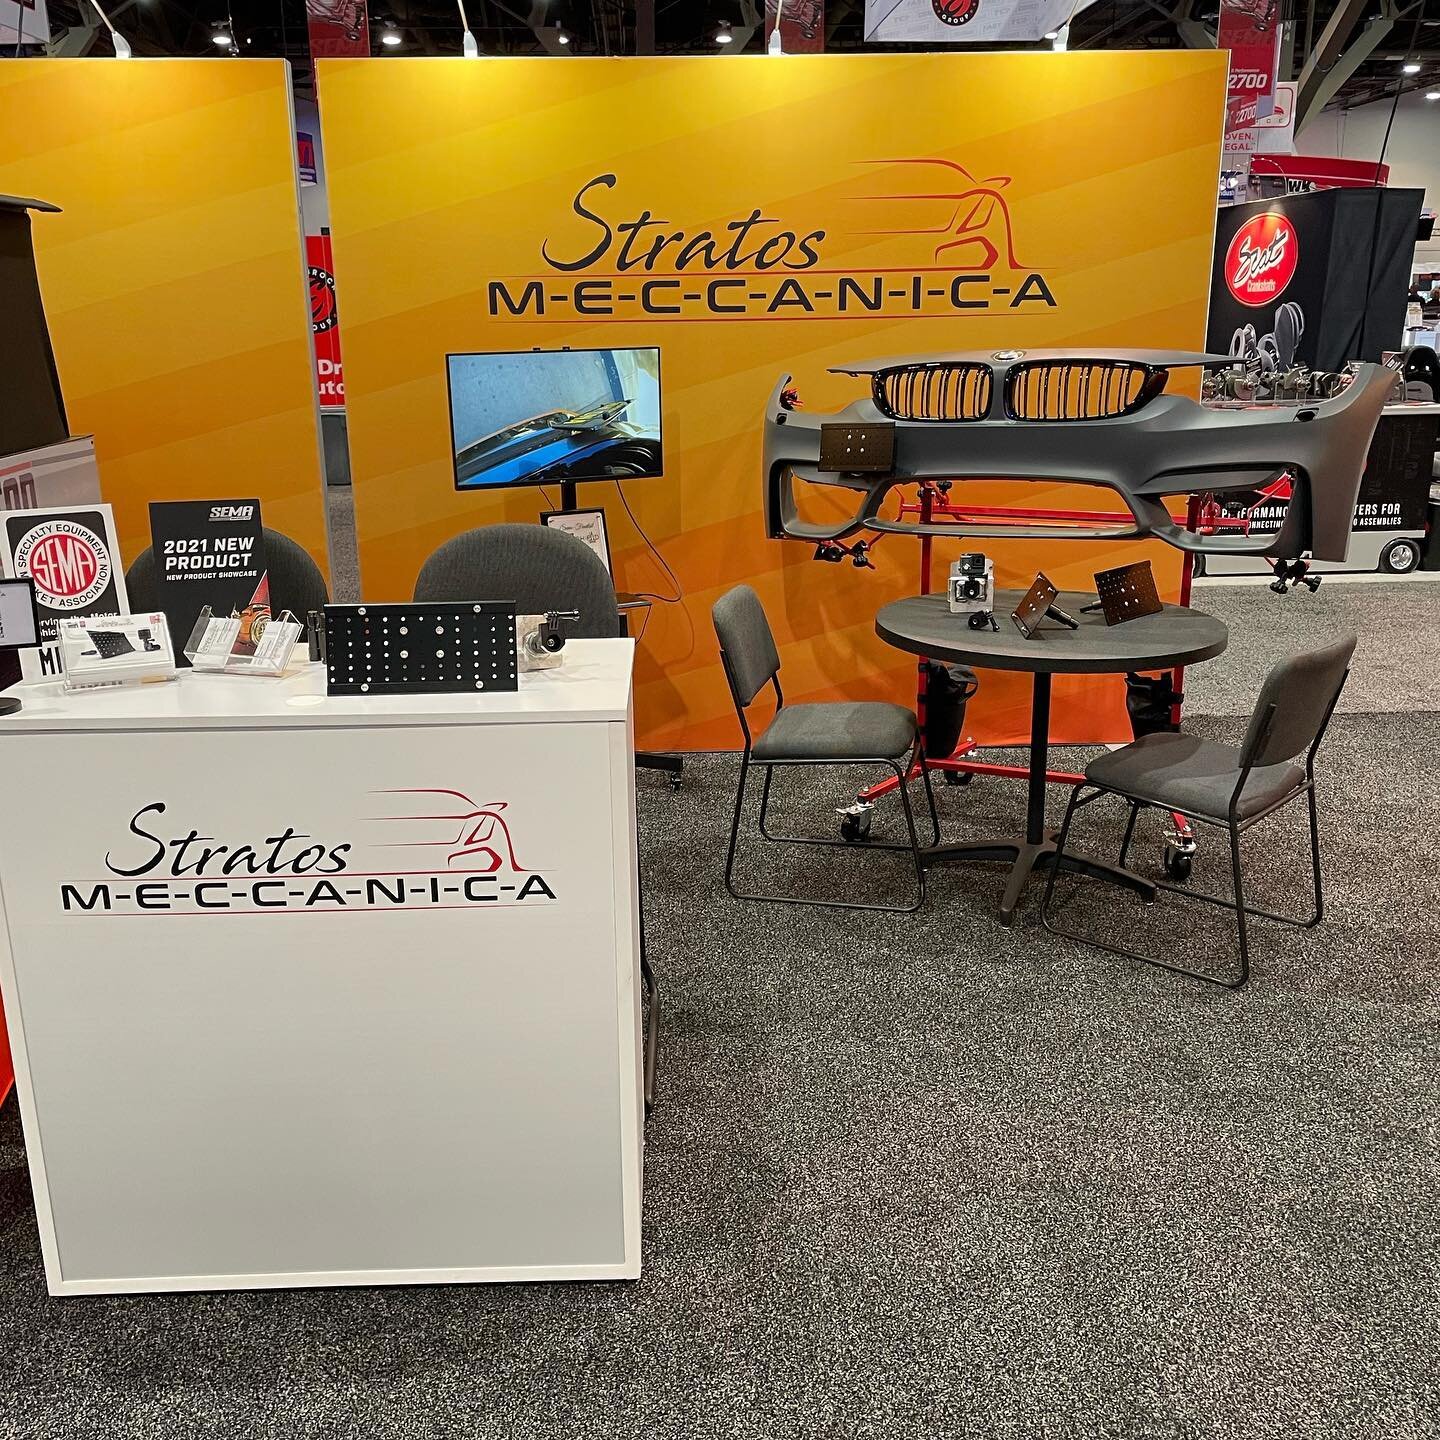 Come check us out in the Central Hall at #SEMA2021 in the Launch Pad Pavilion 🚀 booth #22658 to get hands on experience with our industry leading product